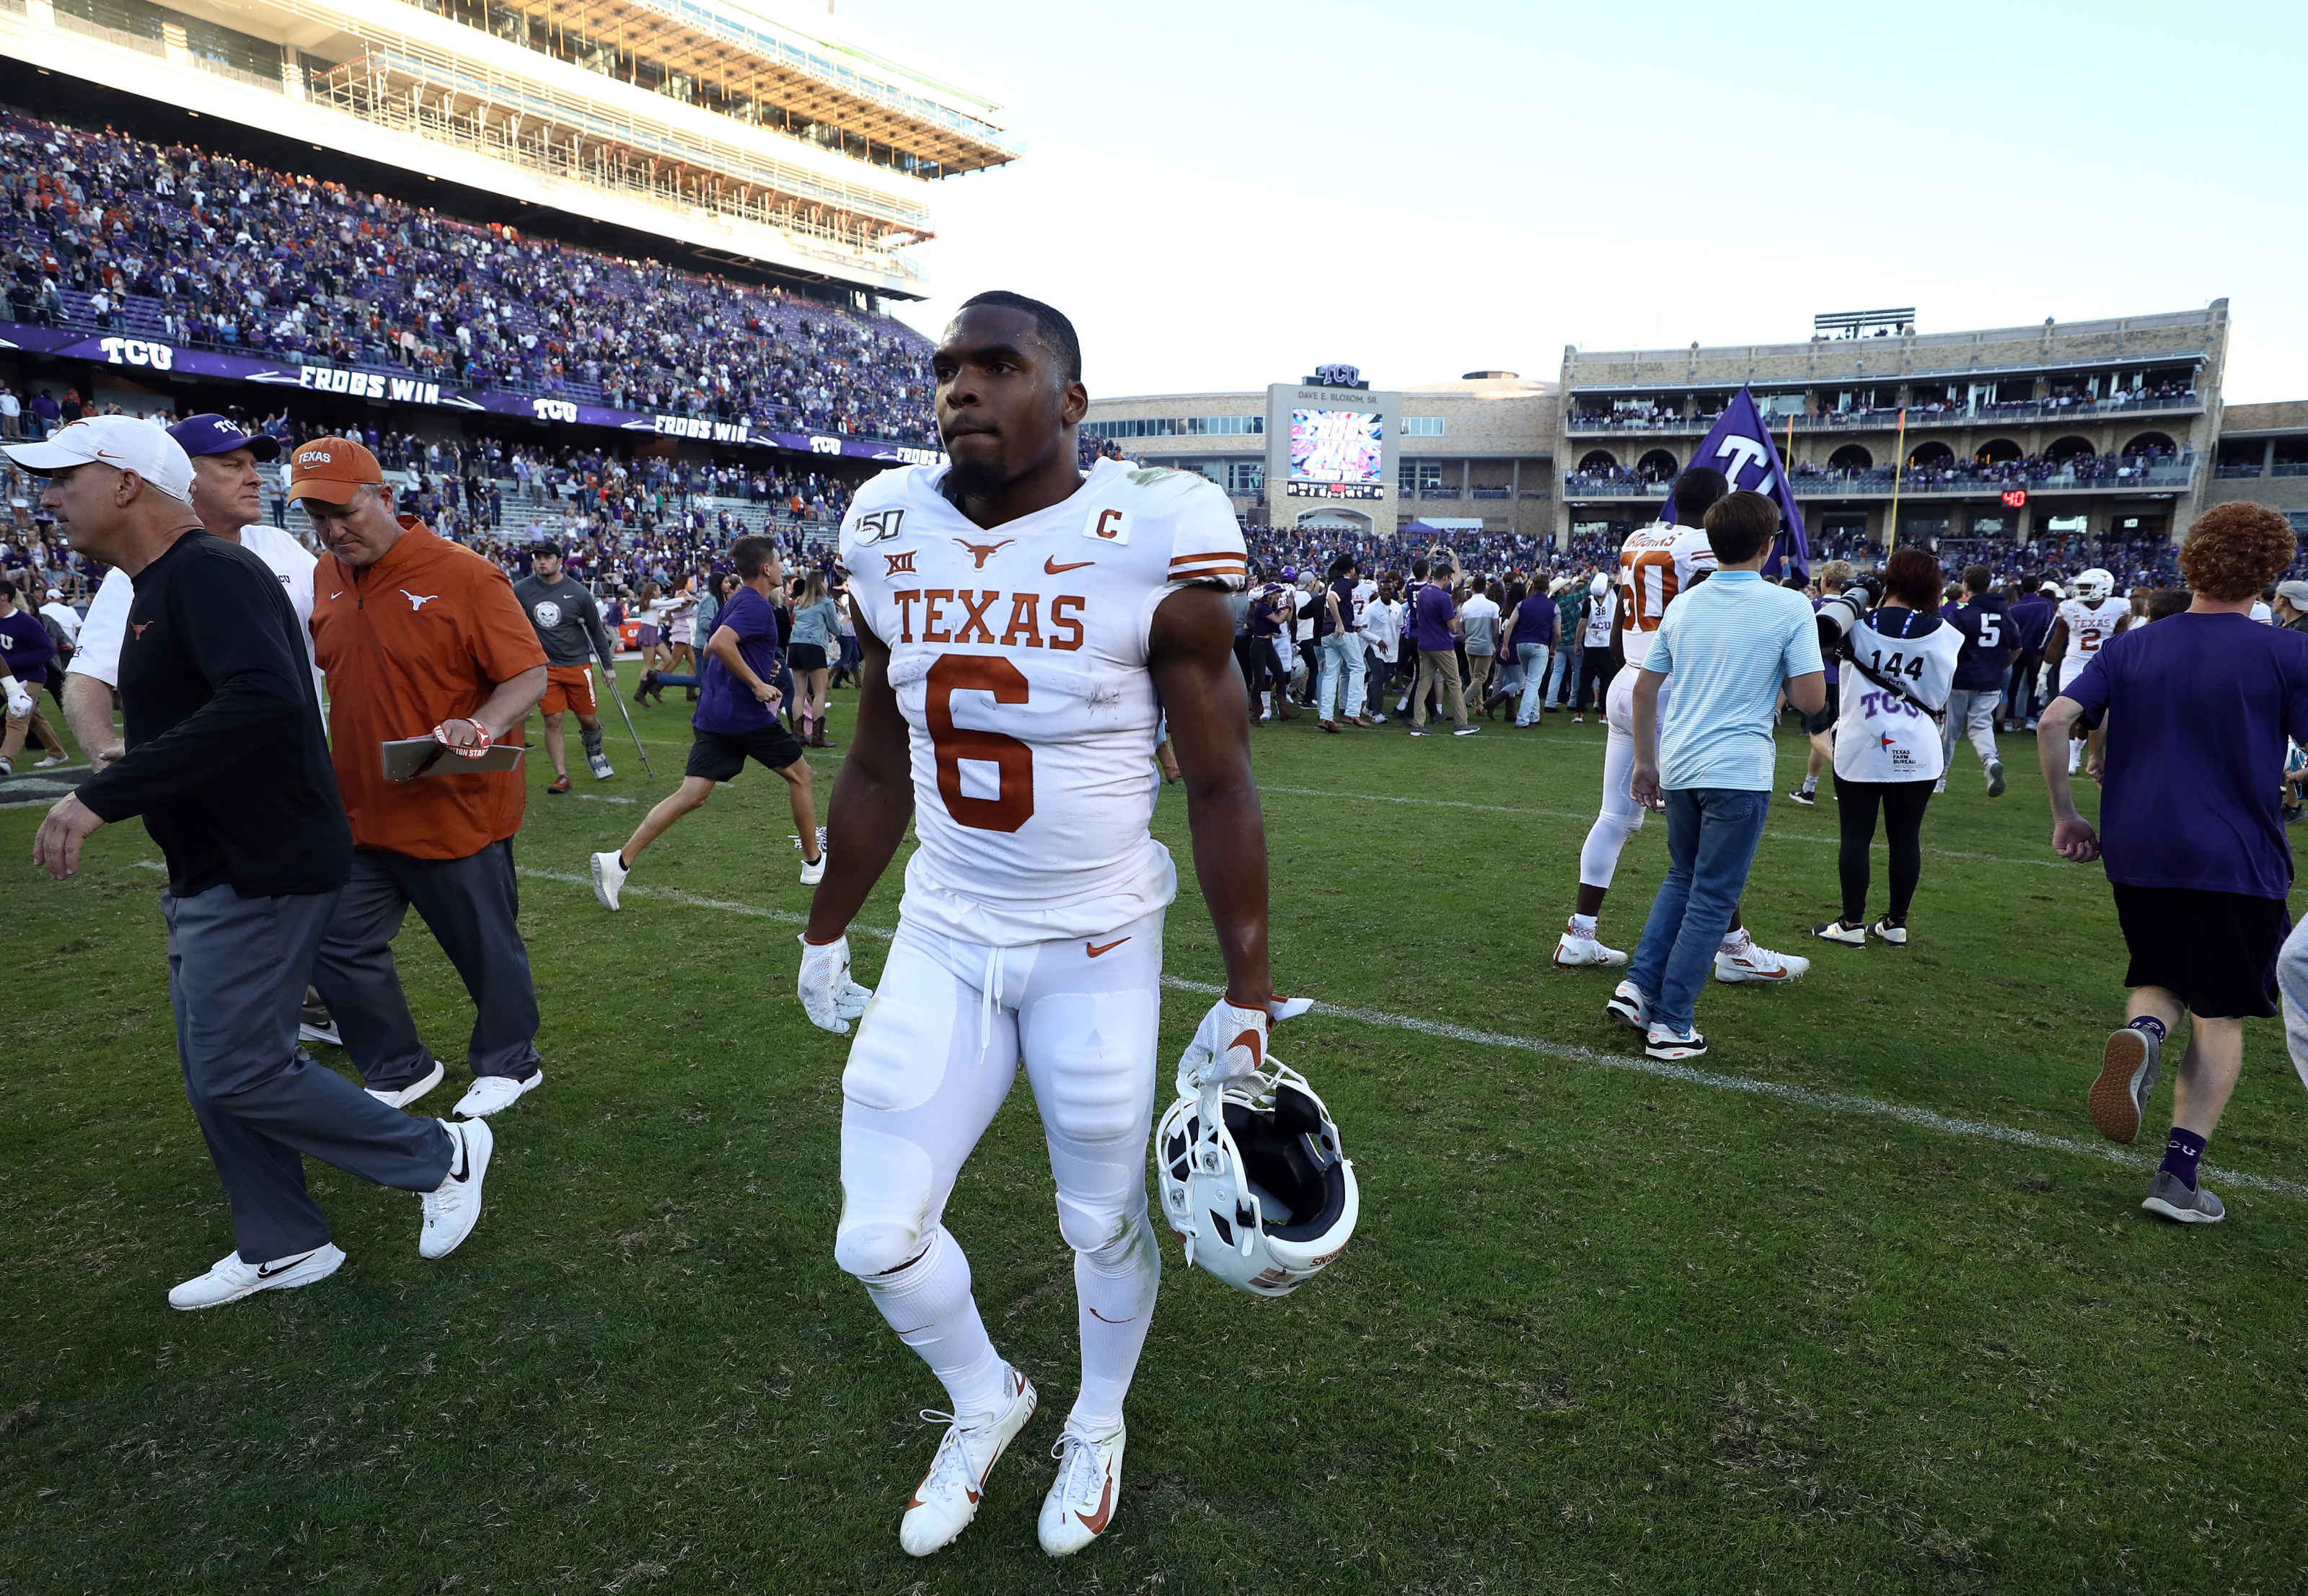 2020 NFL Draft: Texas WR Devin Duvernay Scouting Report